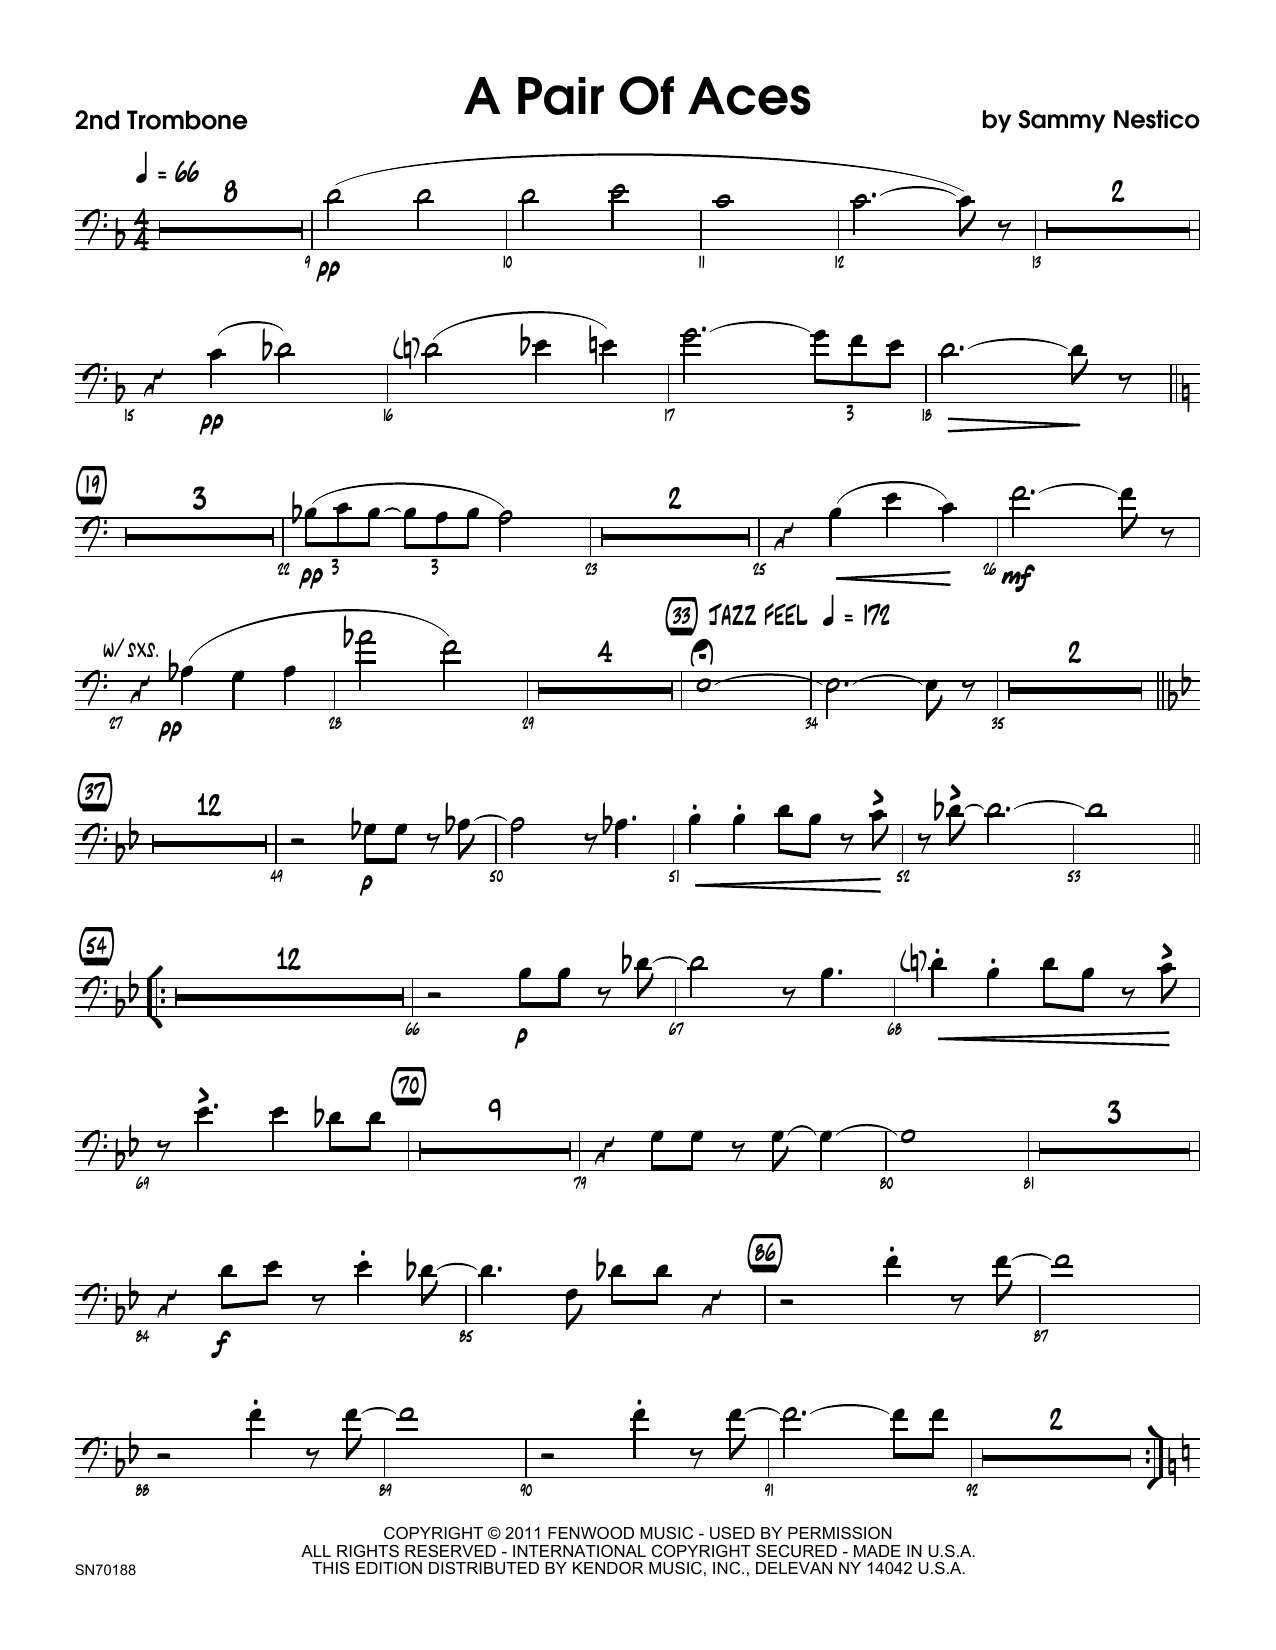 Download Sammy Nestico A Pair Of Aces - 2nd Trombone Sheet Music